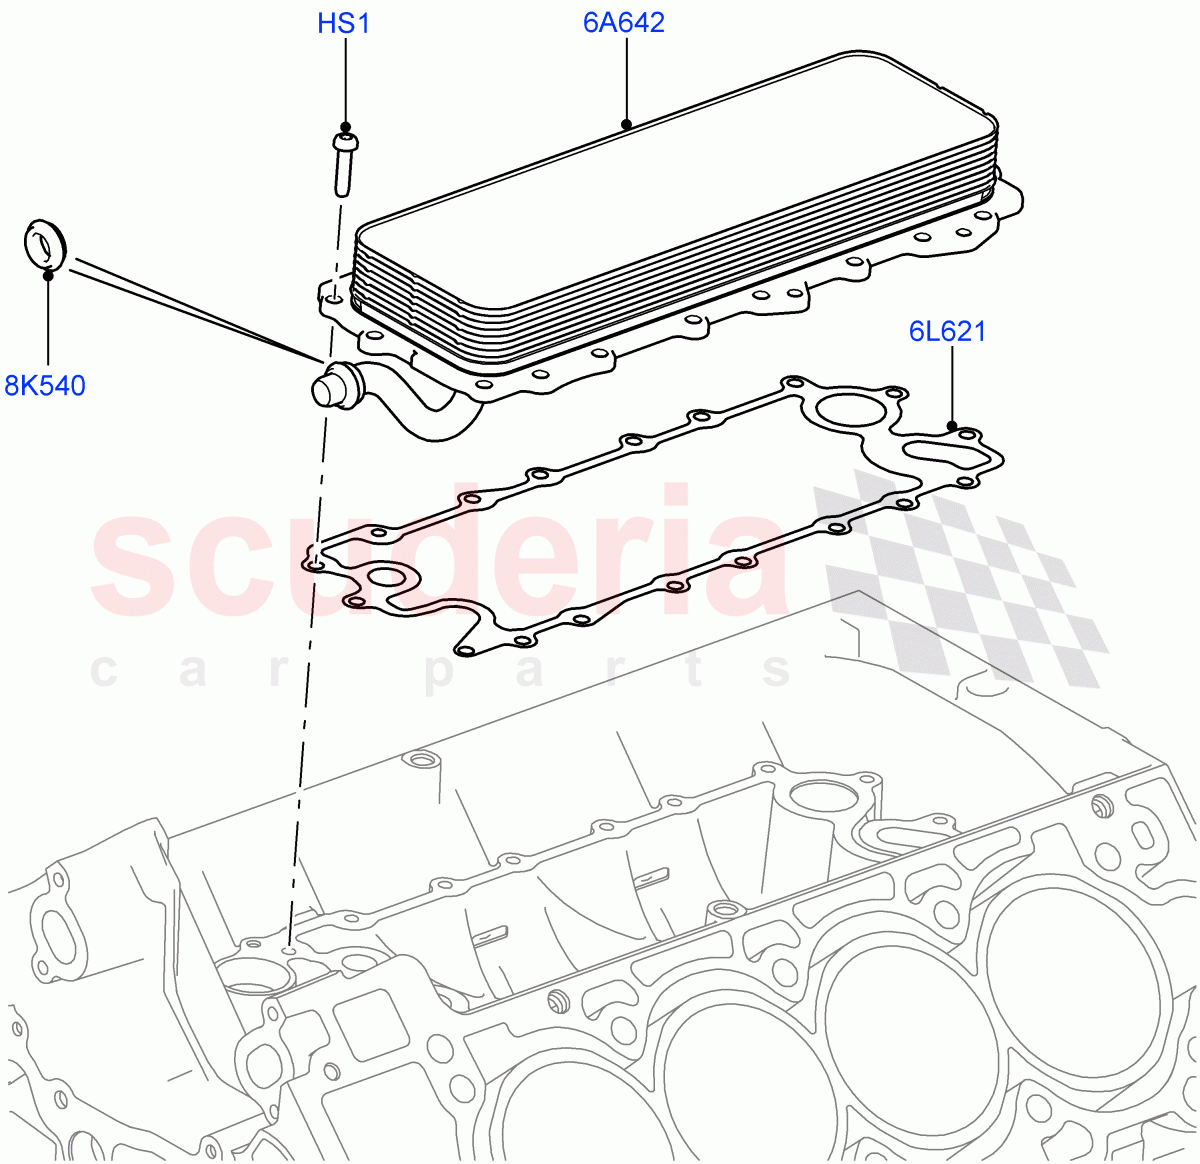 Oil Cooler And Filter(Oil Cooler)(5.0L OHC SGDI SC V8 Petrol - AJ133,5.0 Petrol AJ133 DOHC CDA,5.0L P AJ133 DOHC CDA S/C Enhanced)((V)FROMAA000001) of Land Rover Land Rover Range Rover Sport (2010-2013) [5.0 OHC SGDI SC V8 Petrol]